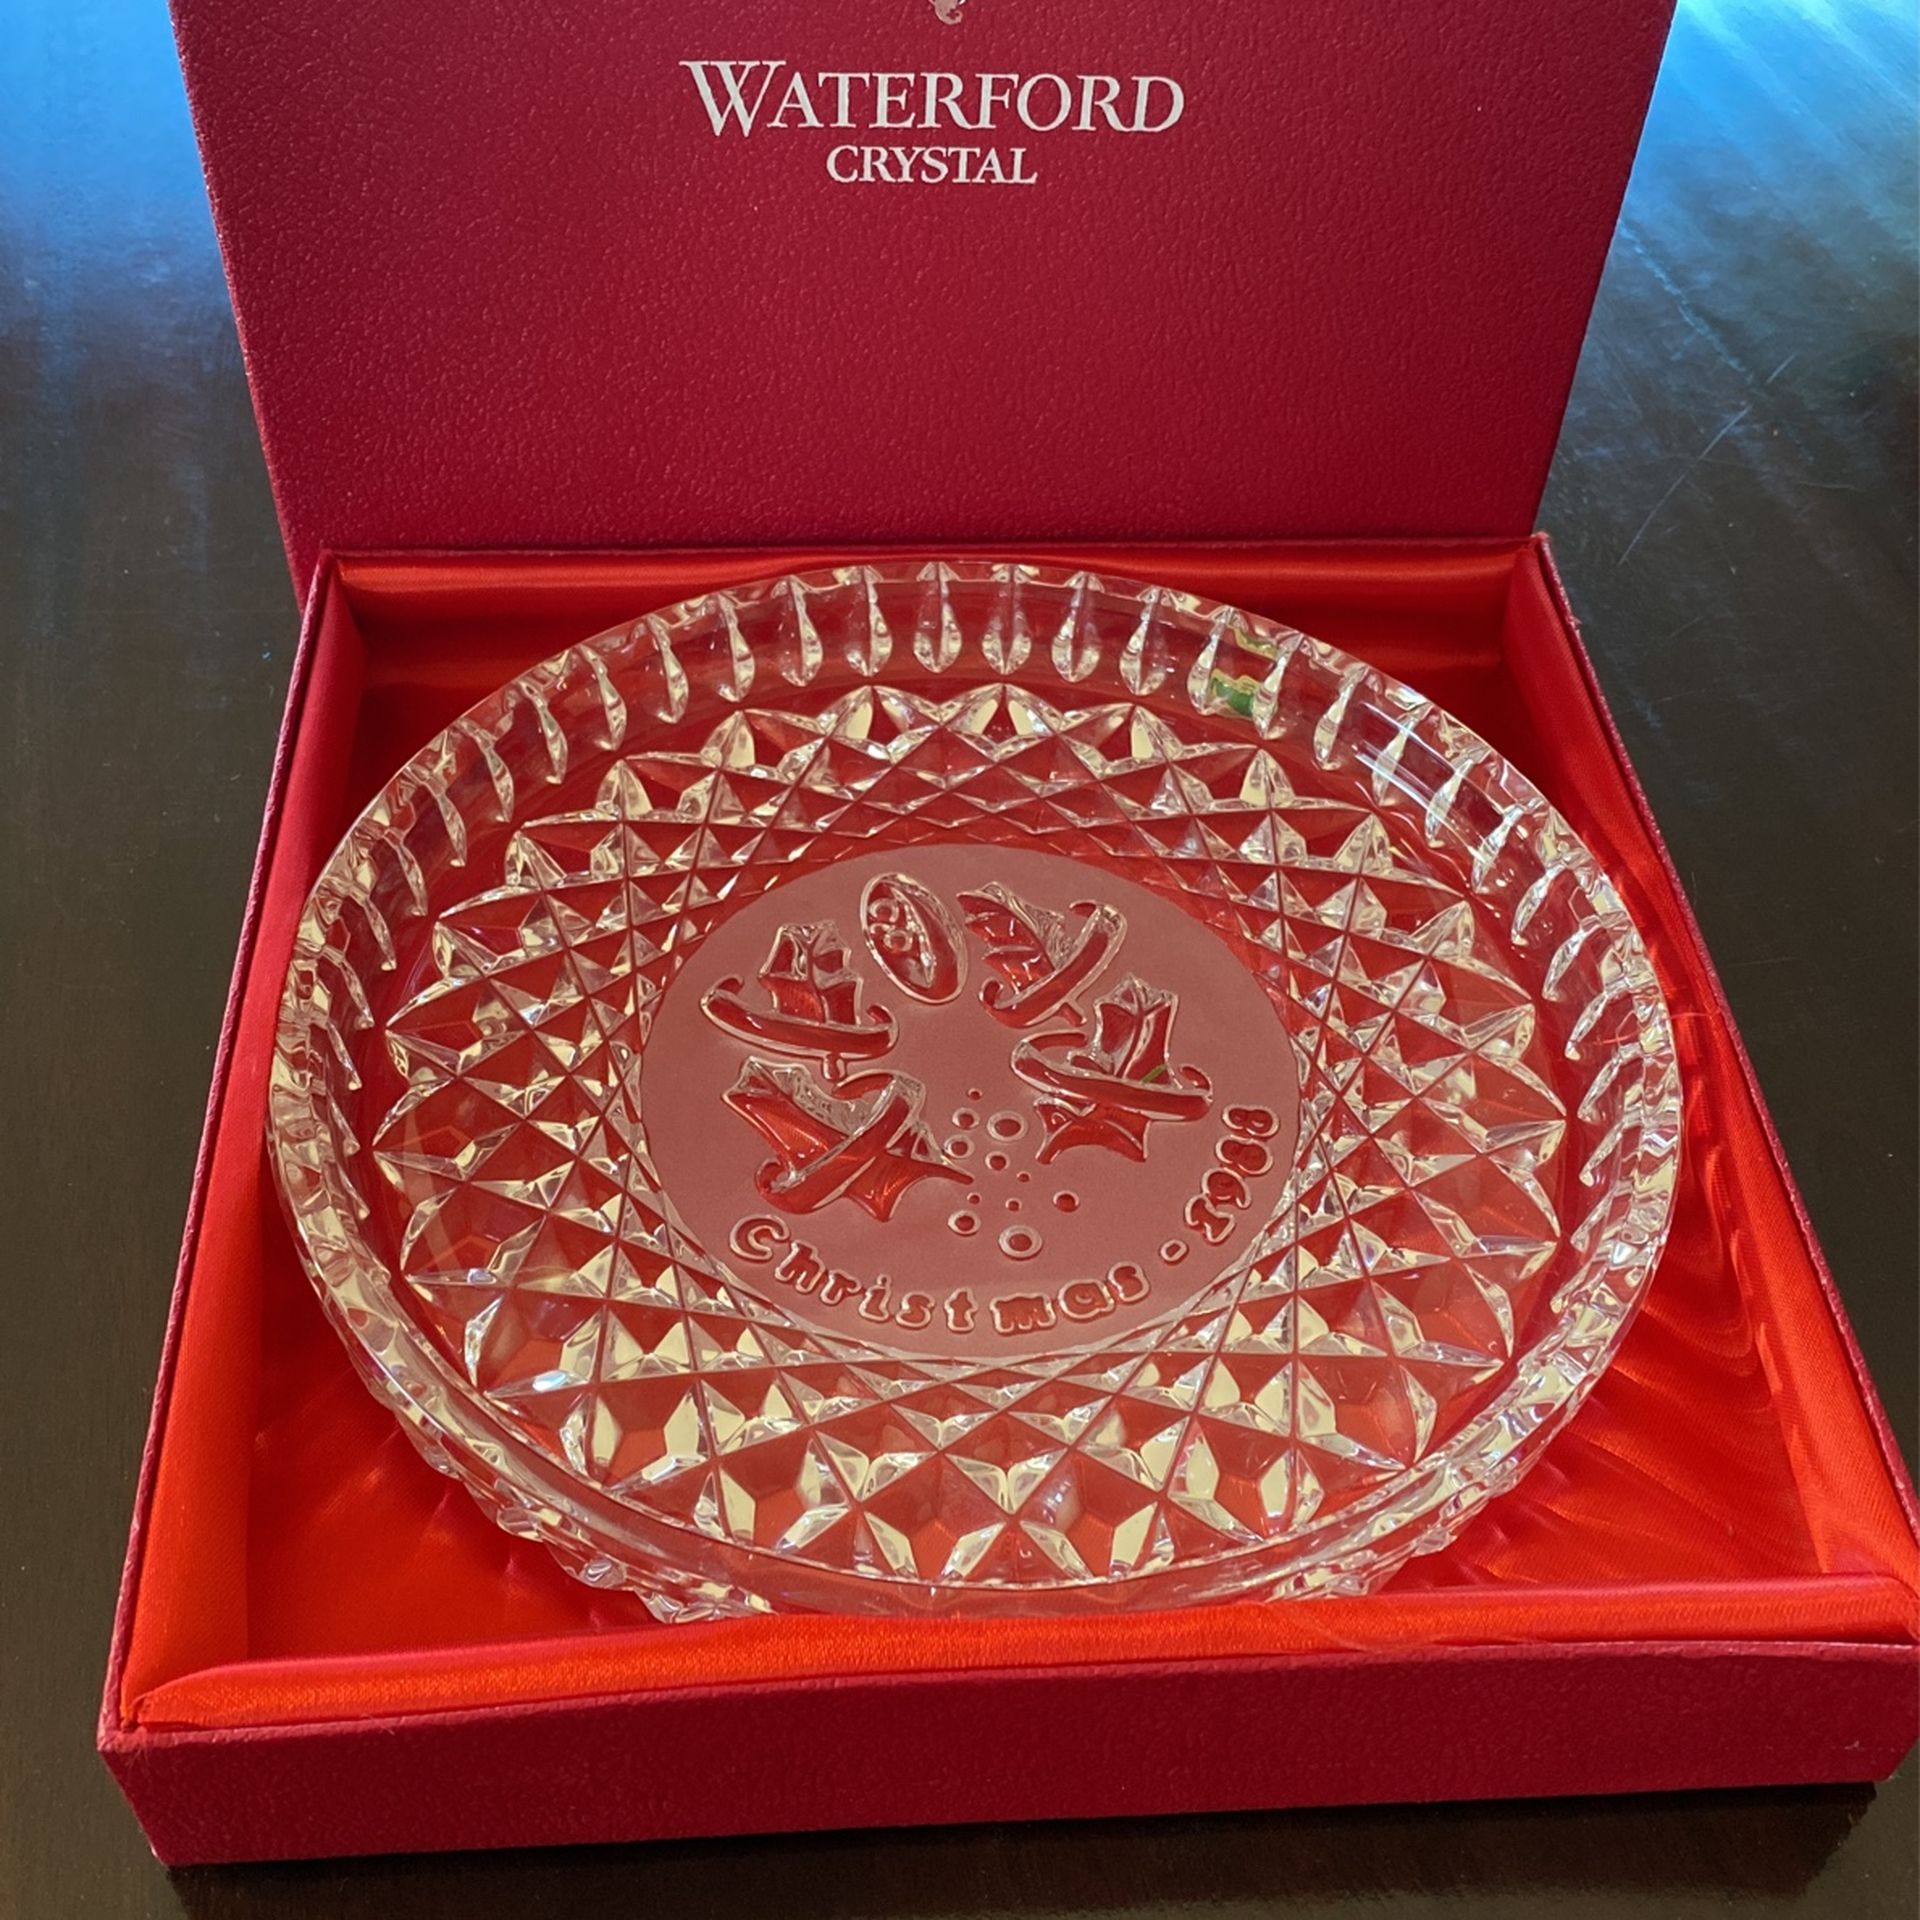 WATERFORD CRYSTAL CHRISTMAS 1988 DISH PLATE 5 Golden Rings, 12 Days of Christmas